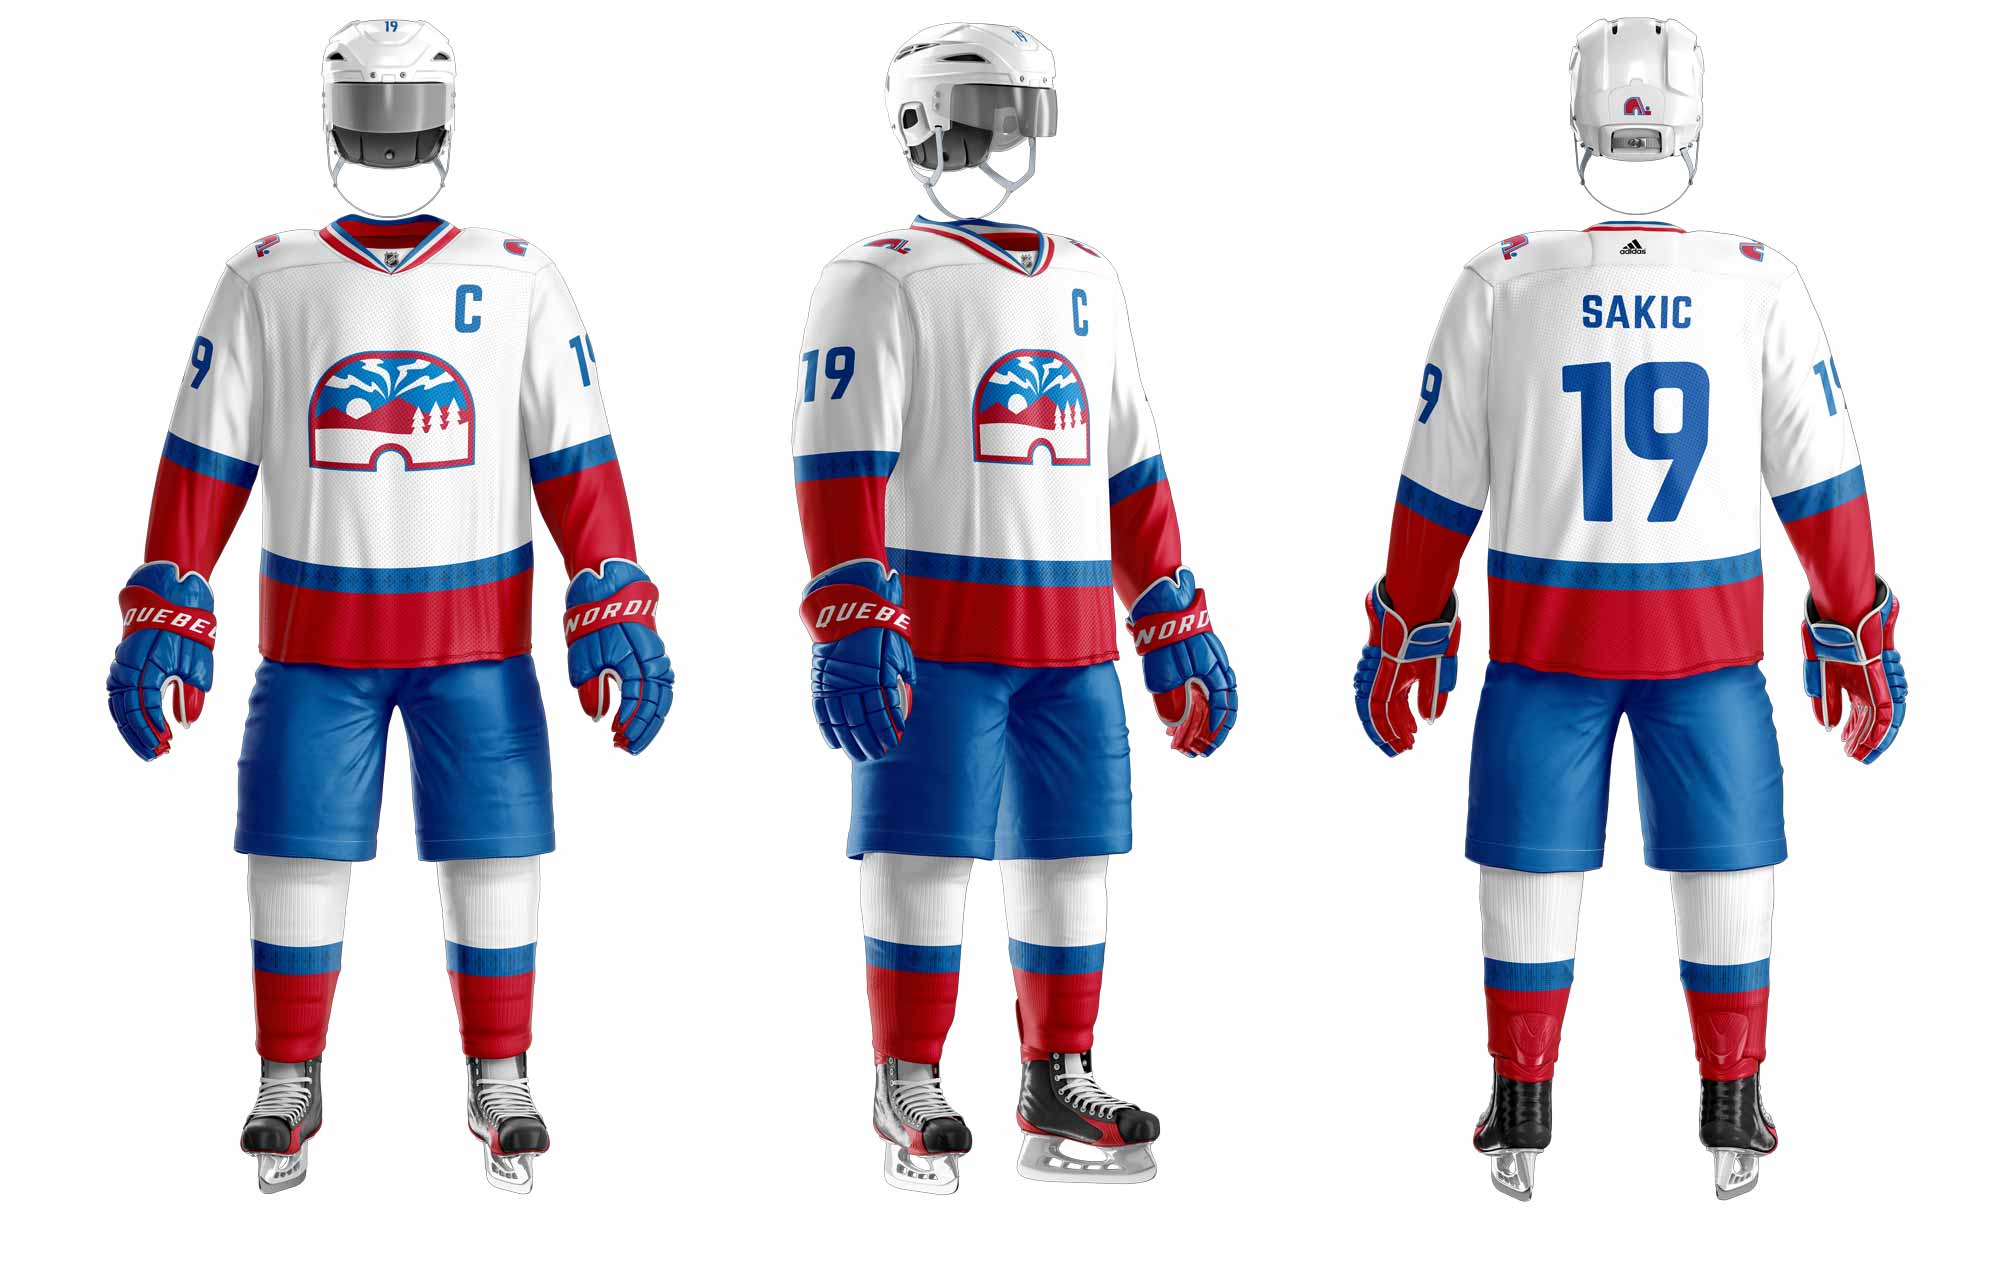 A front, three quarter, and back view of the away jersey.